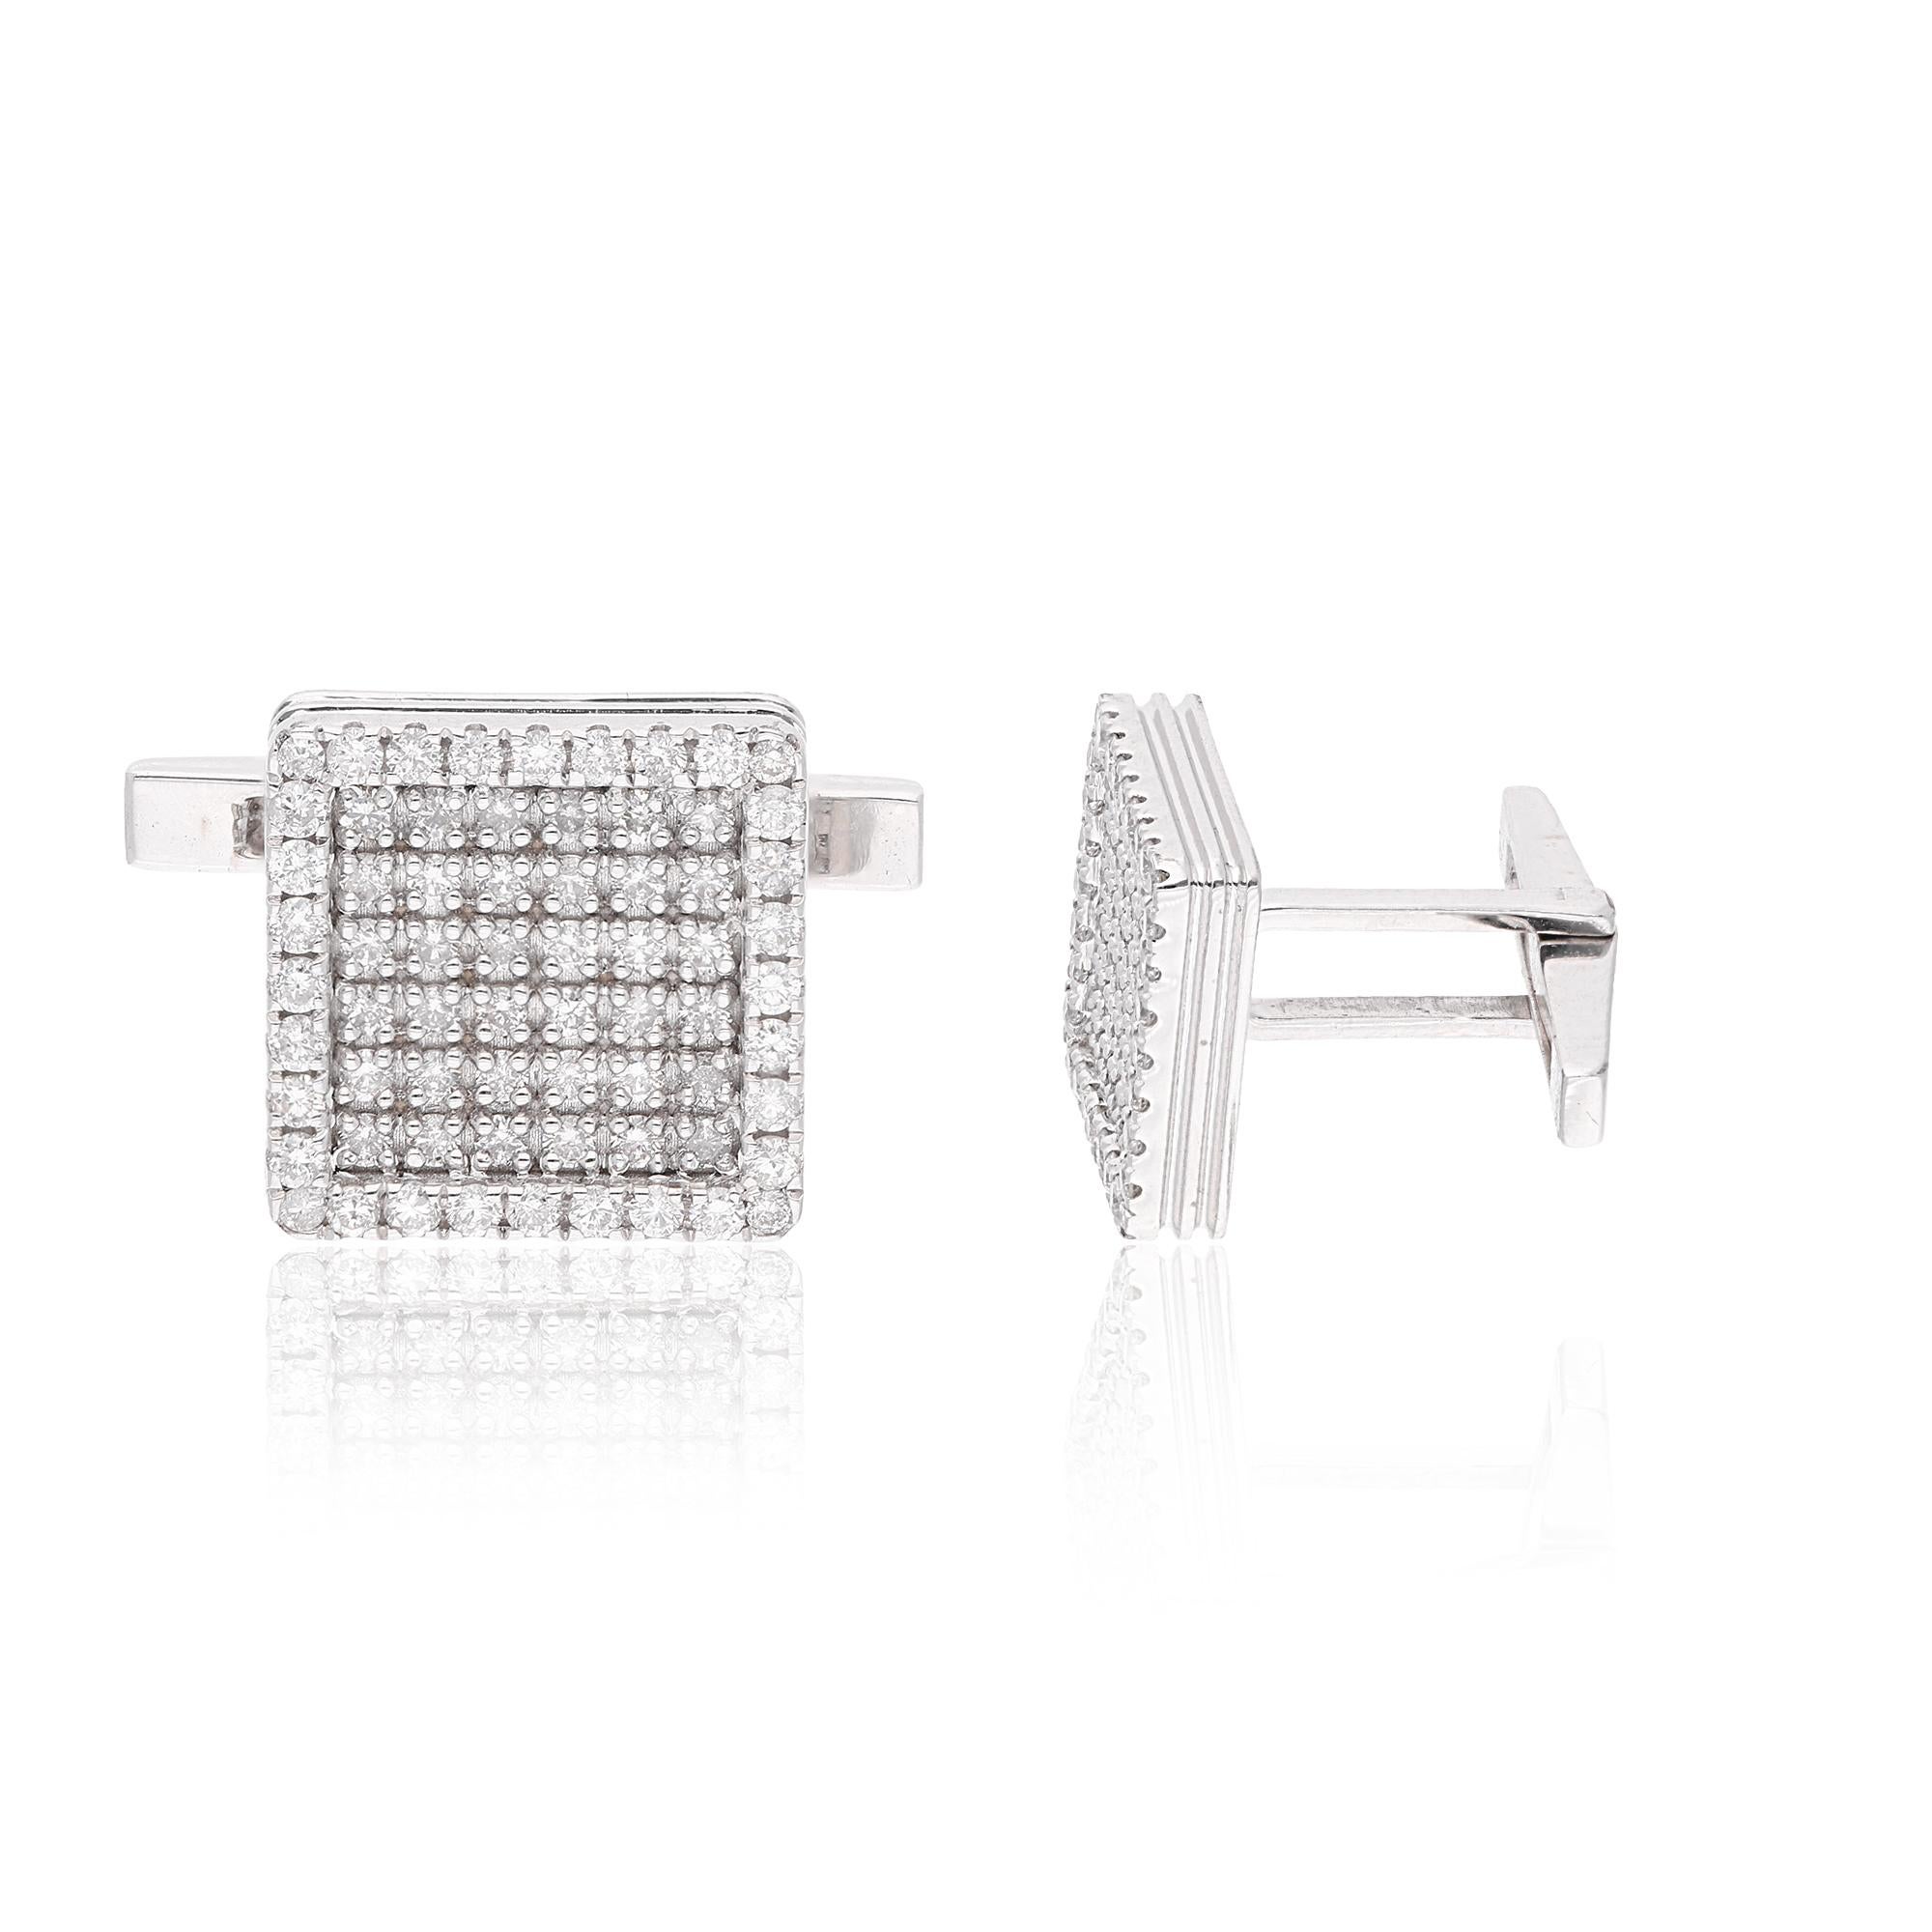 Crafted from lustrous 18 Karat White Gold, these cufflinks boast a sleek and polished square design, exuding a sense of timeless elegance and understated masculinity. The smooth surface of the cufflinks provides the perfect canvas for the dazzling